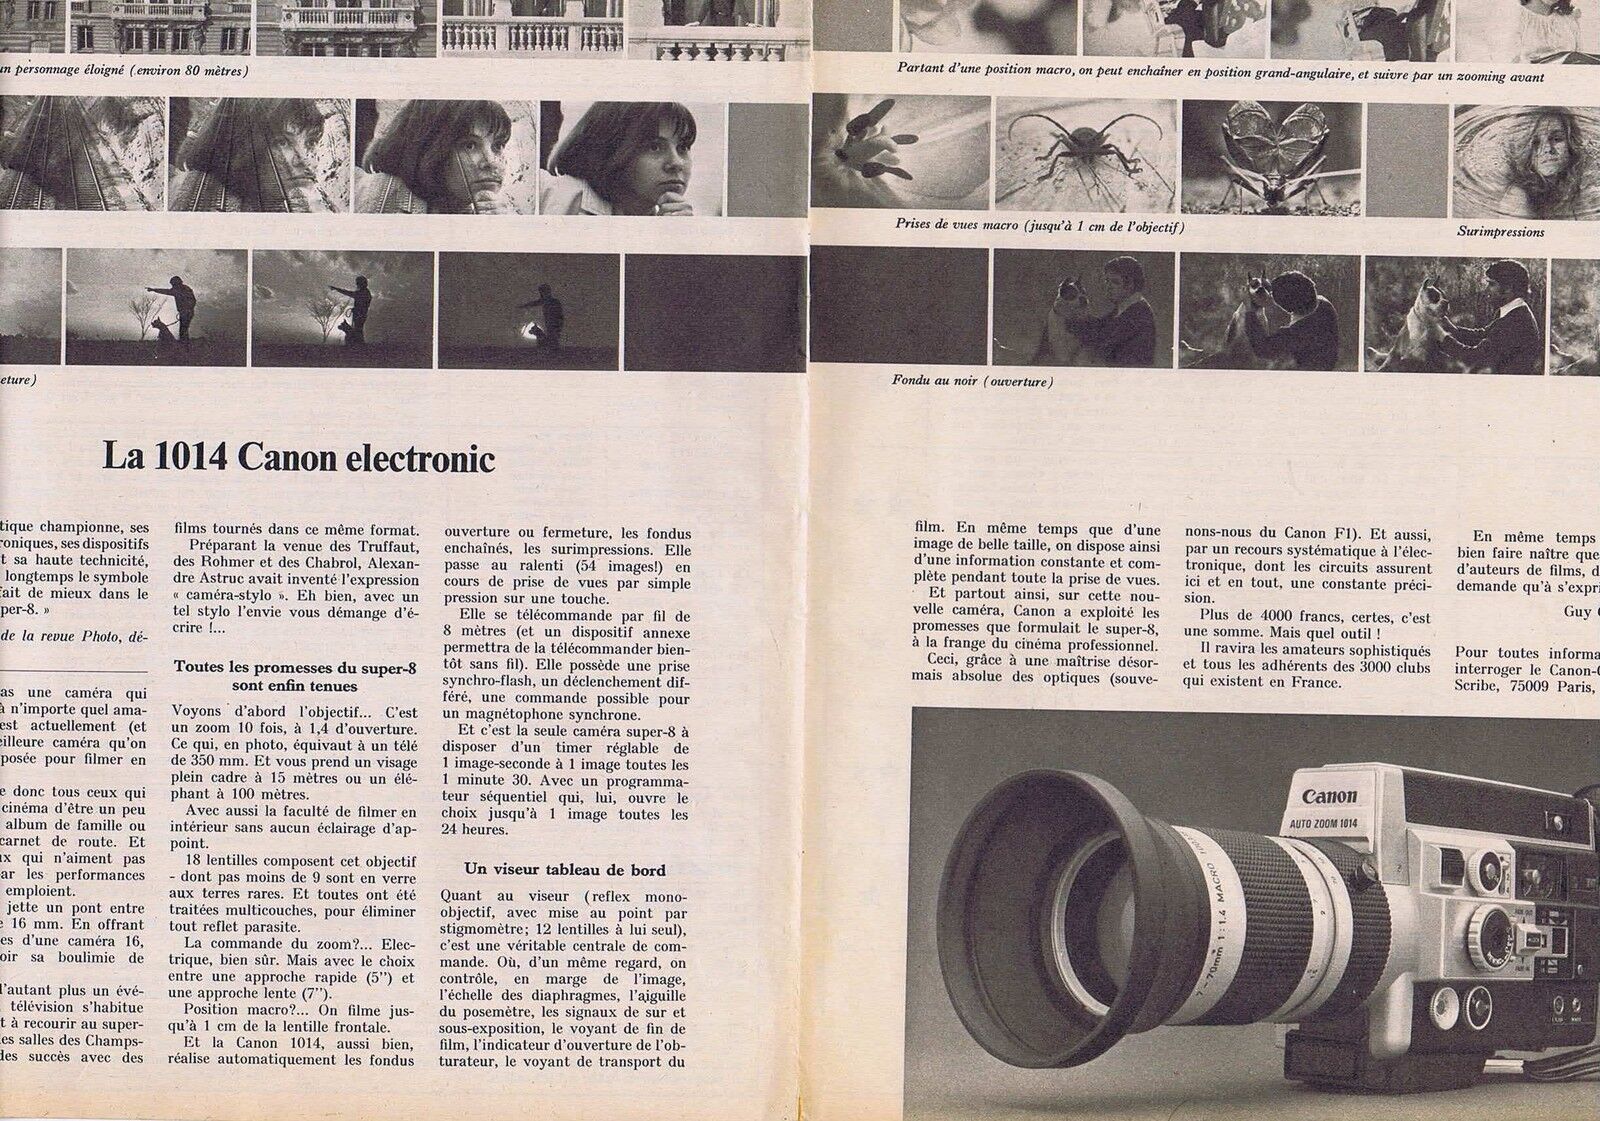 1974 ADVERTISING ADVERTISEMENT 114 la 1014 CANON electronic (2 pages)